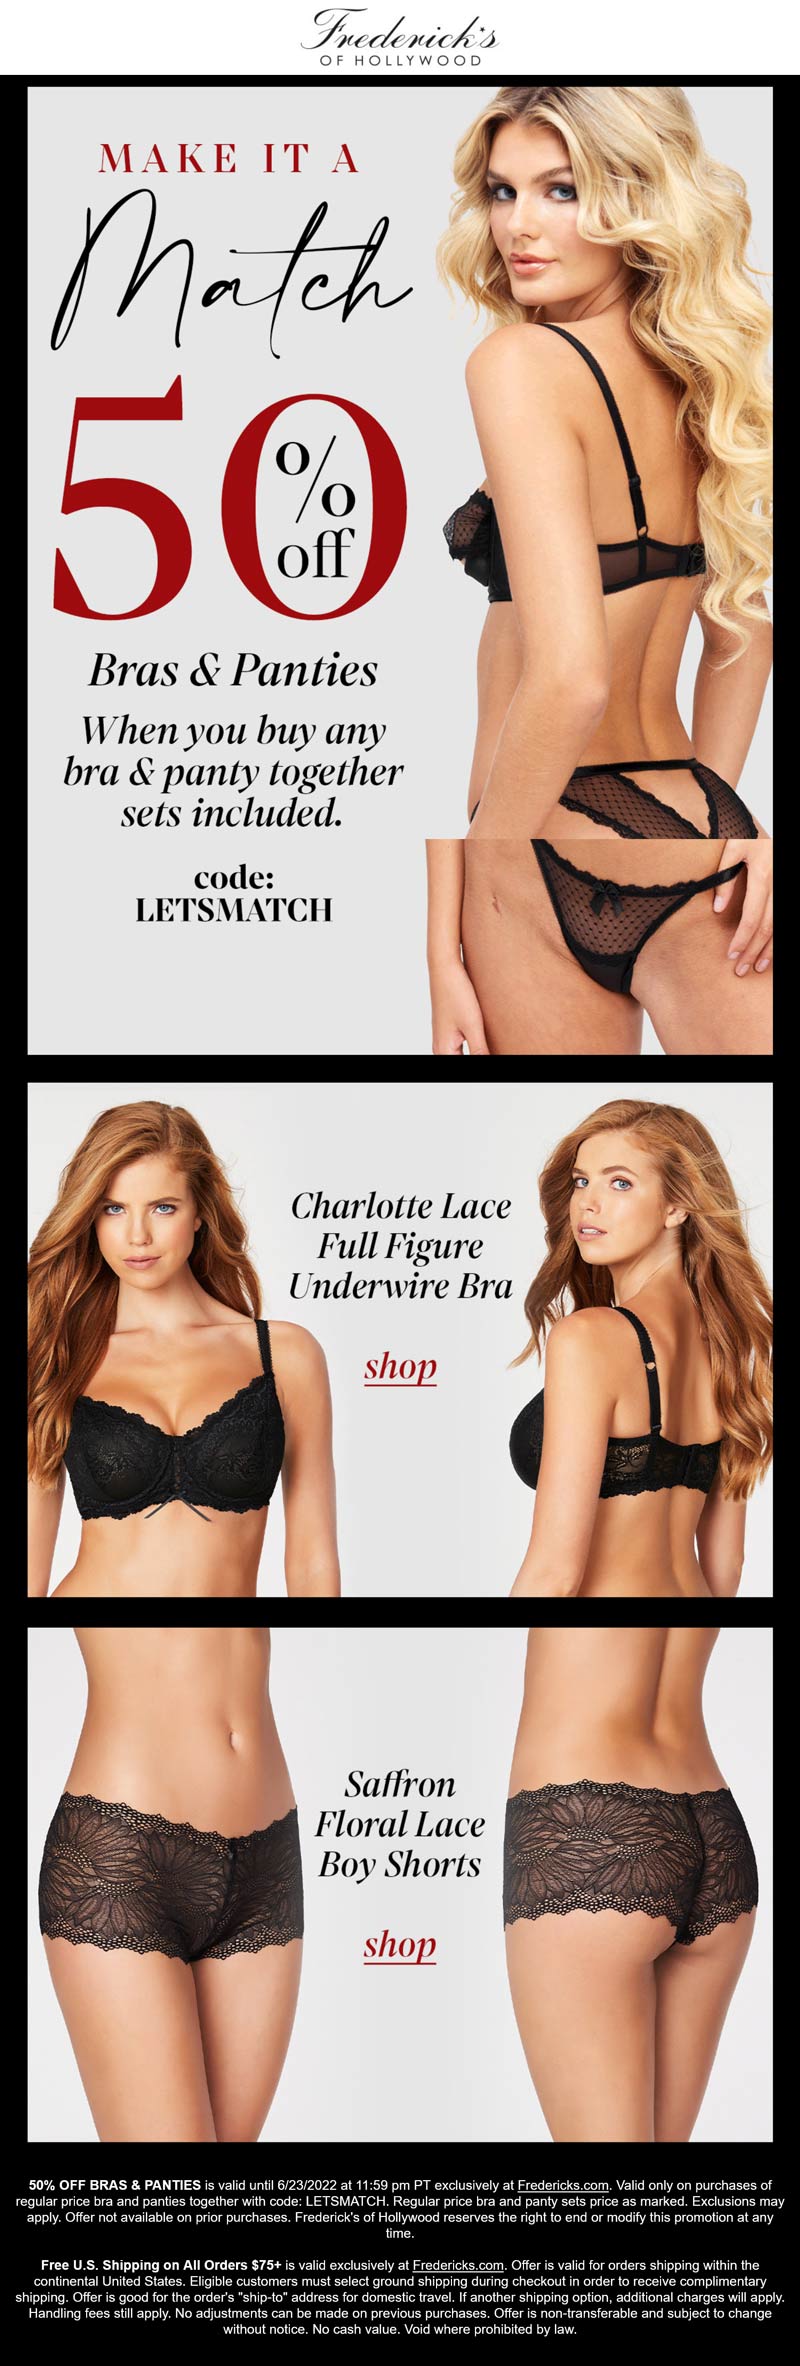 Fredericks of Hollywood stores Coupon  Second bra & panty set 50% off at Fredericks of Hollywood via promo code LETSMATCH #fredericksofhollywood 